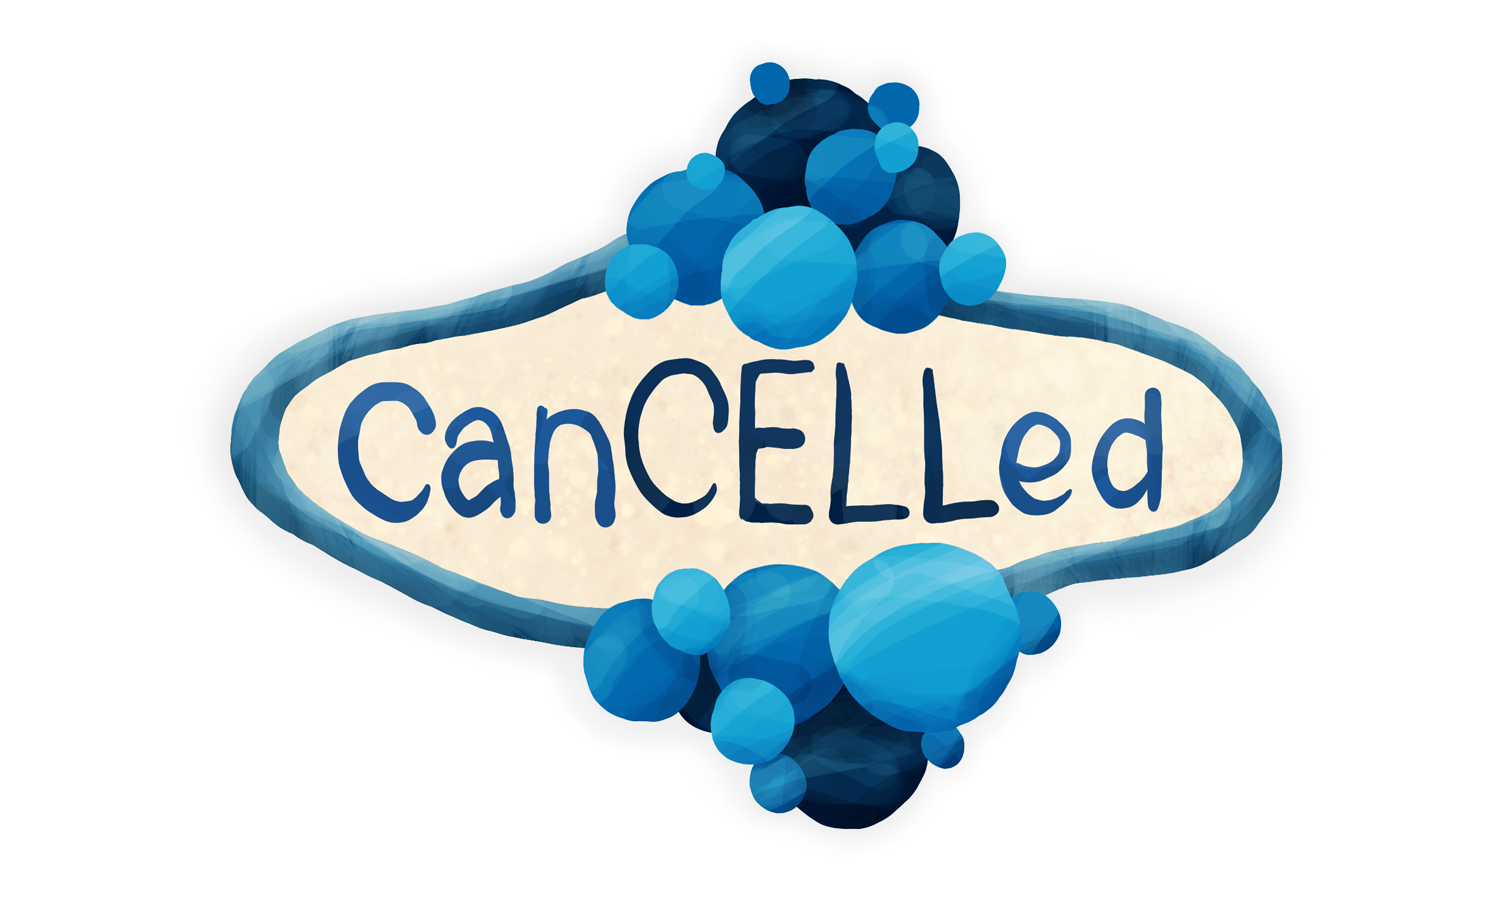 CanCELLed - English